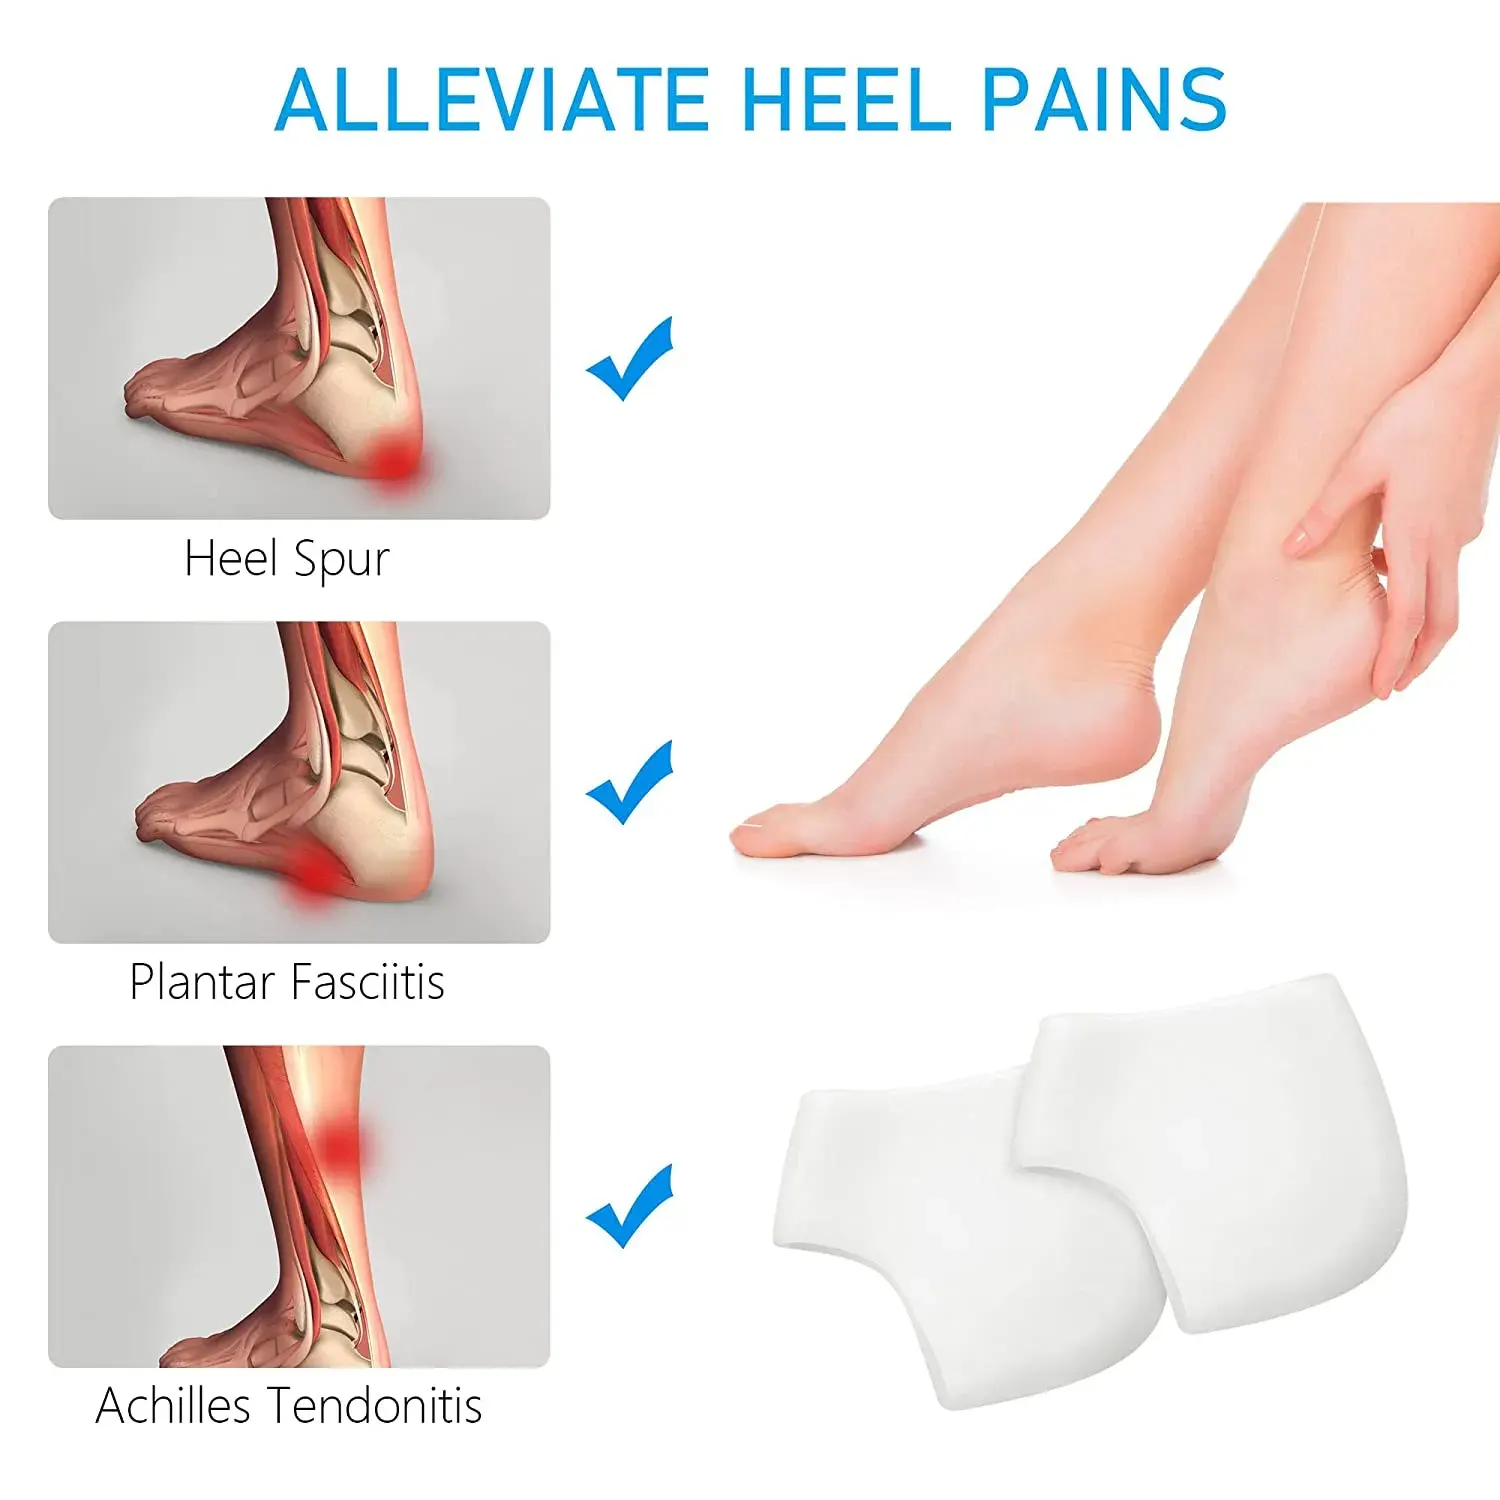 Silicone heel cover to alleviate heel pain